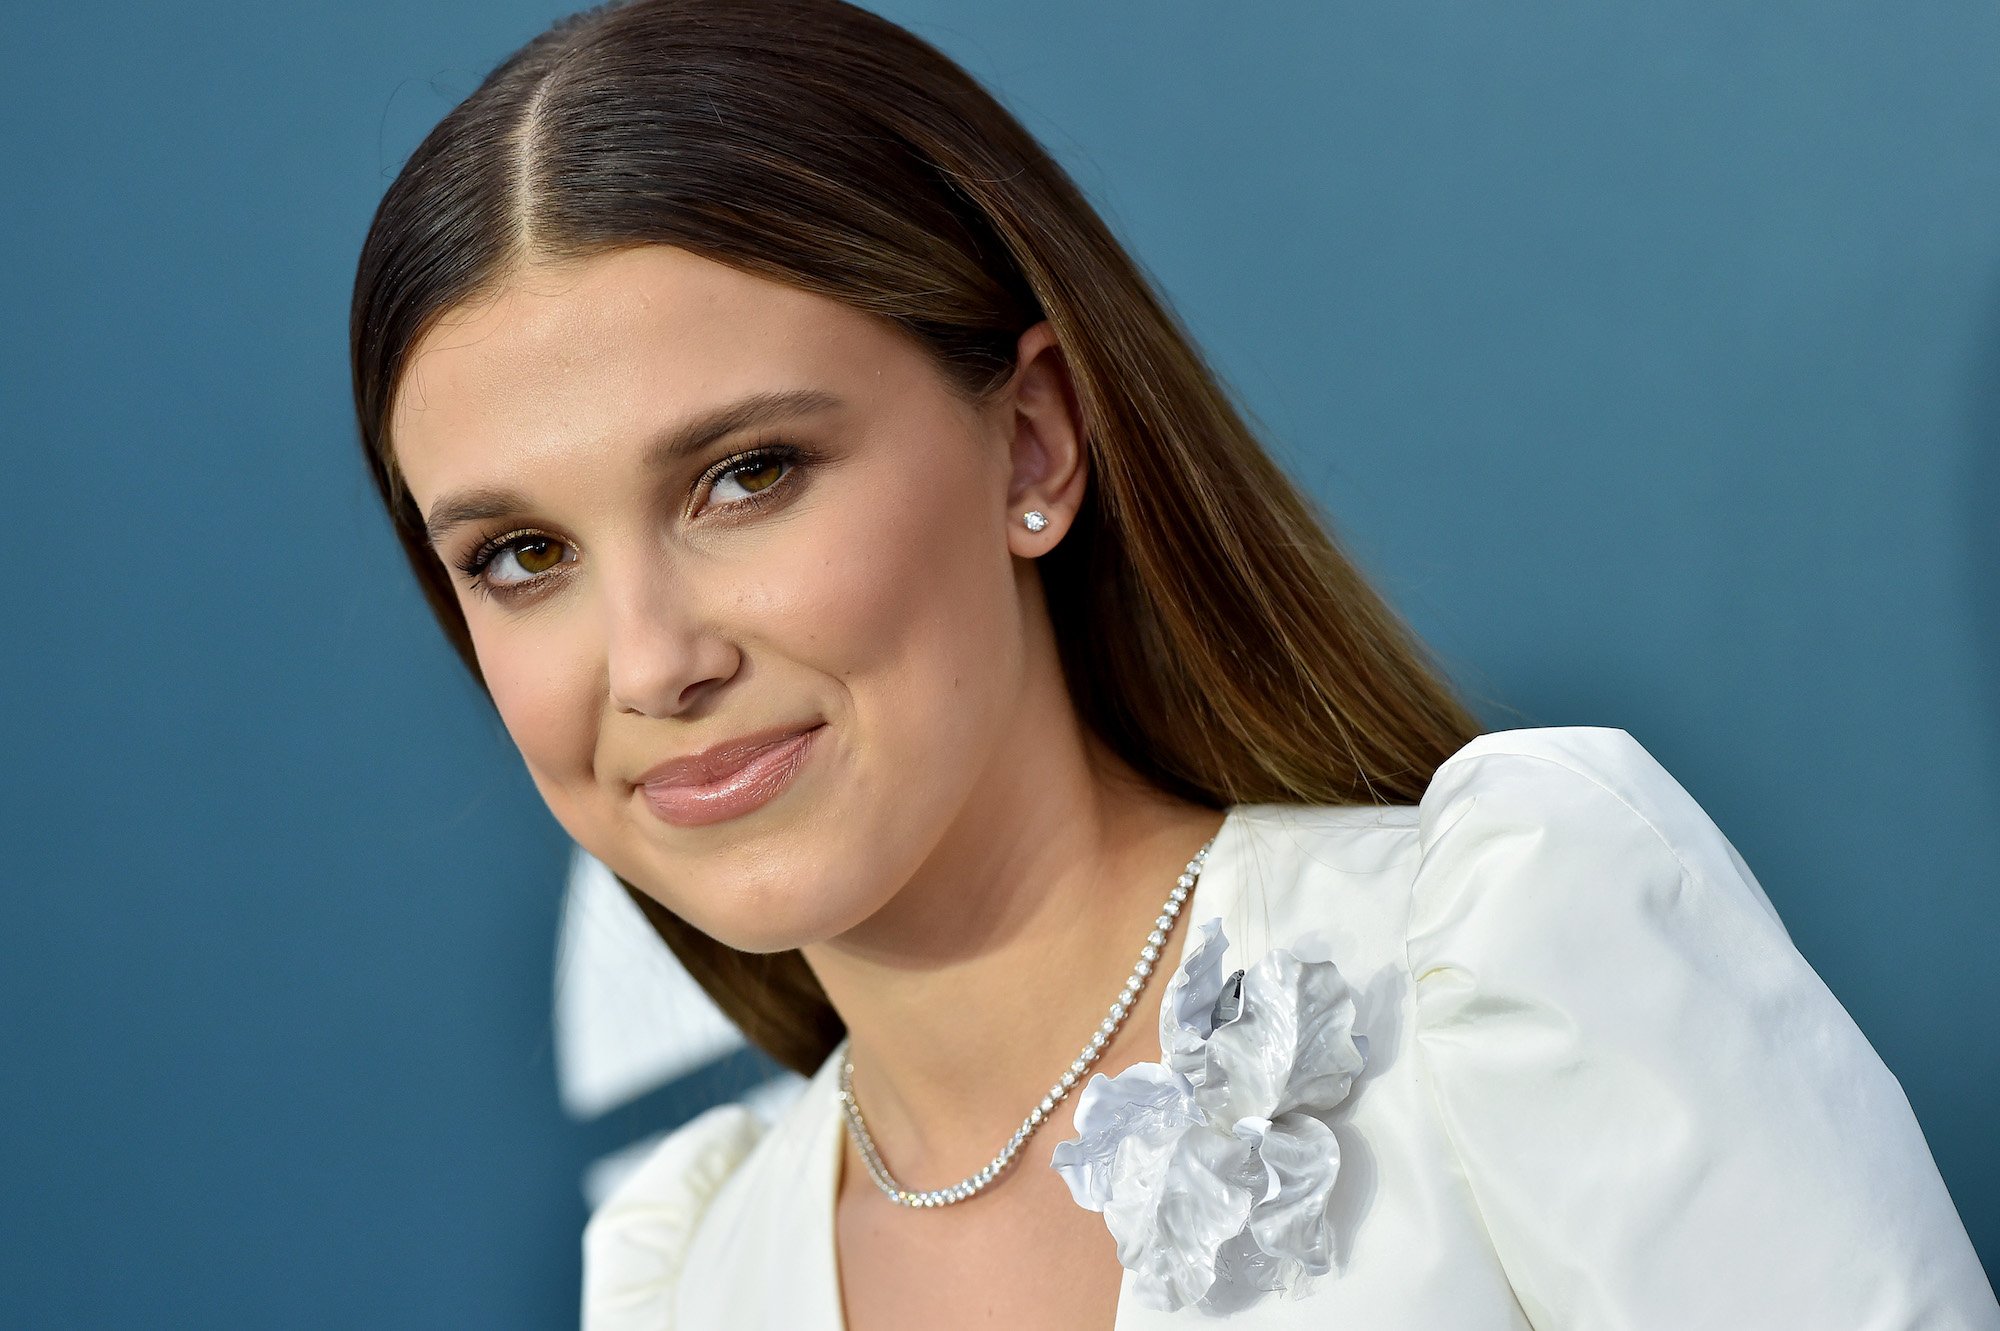 'Stranger Things' star Millie Bobby Brown in a silver dress and straight hair at the 26th Annual Screen Actors Guild Awards.